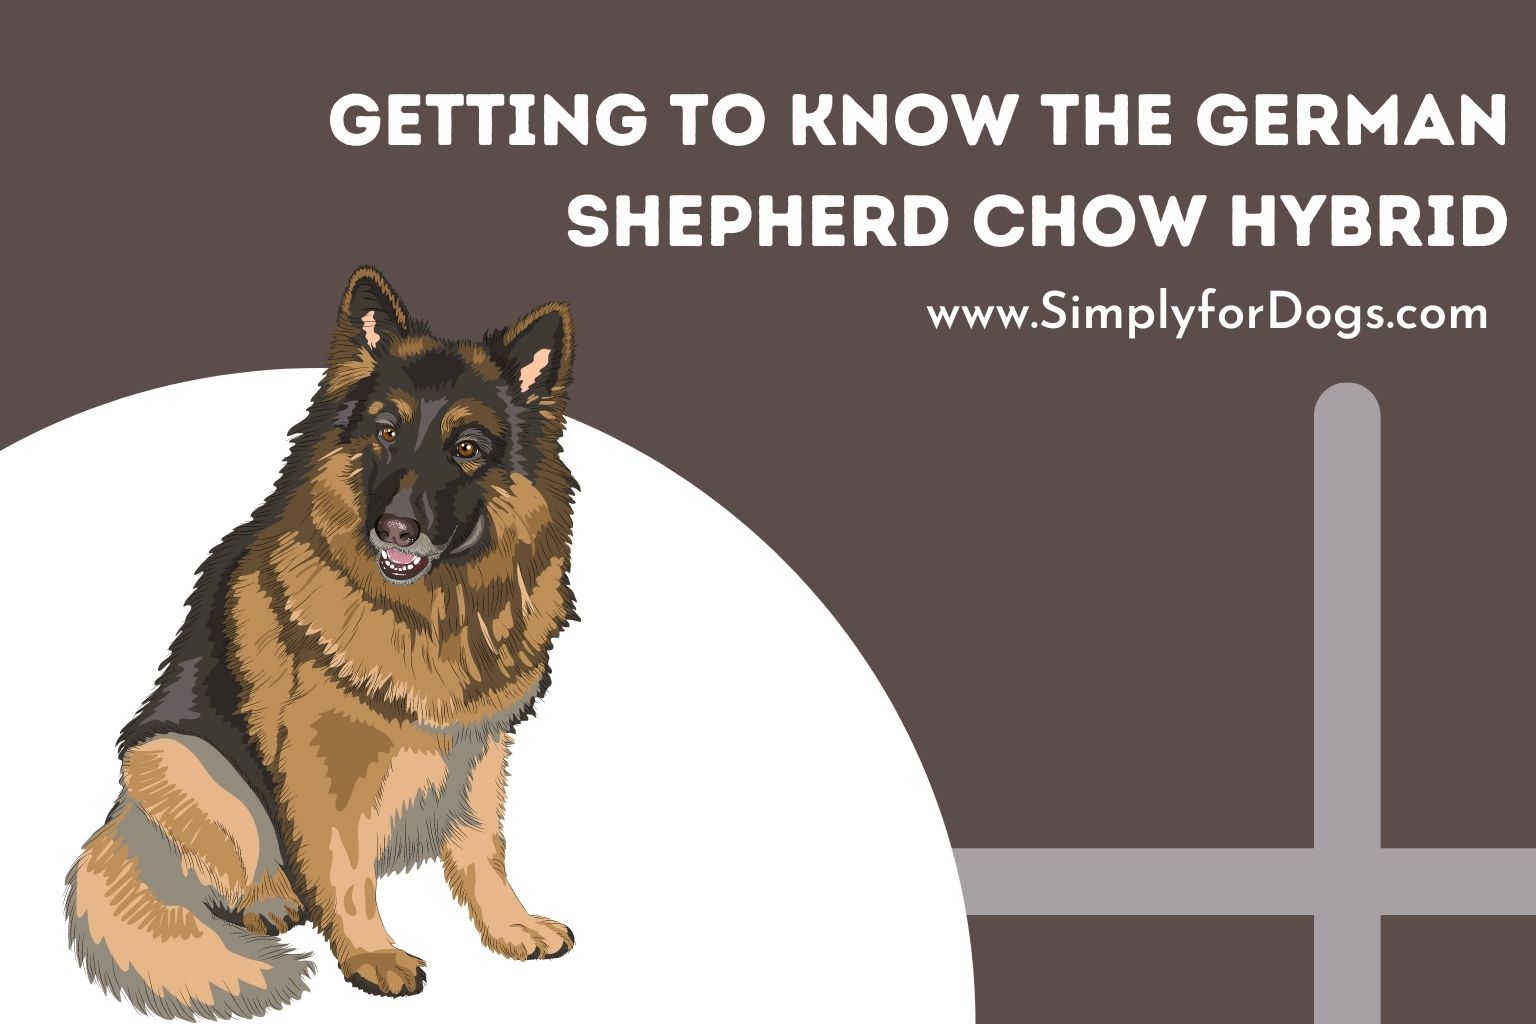 Getting to Know the German Shepherd Chow Hybrid